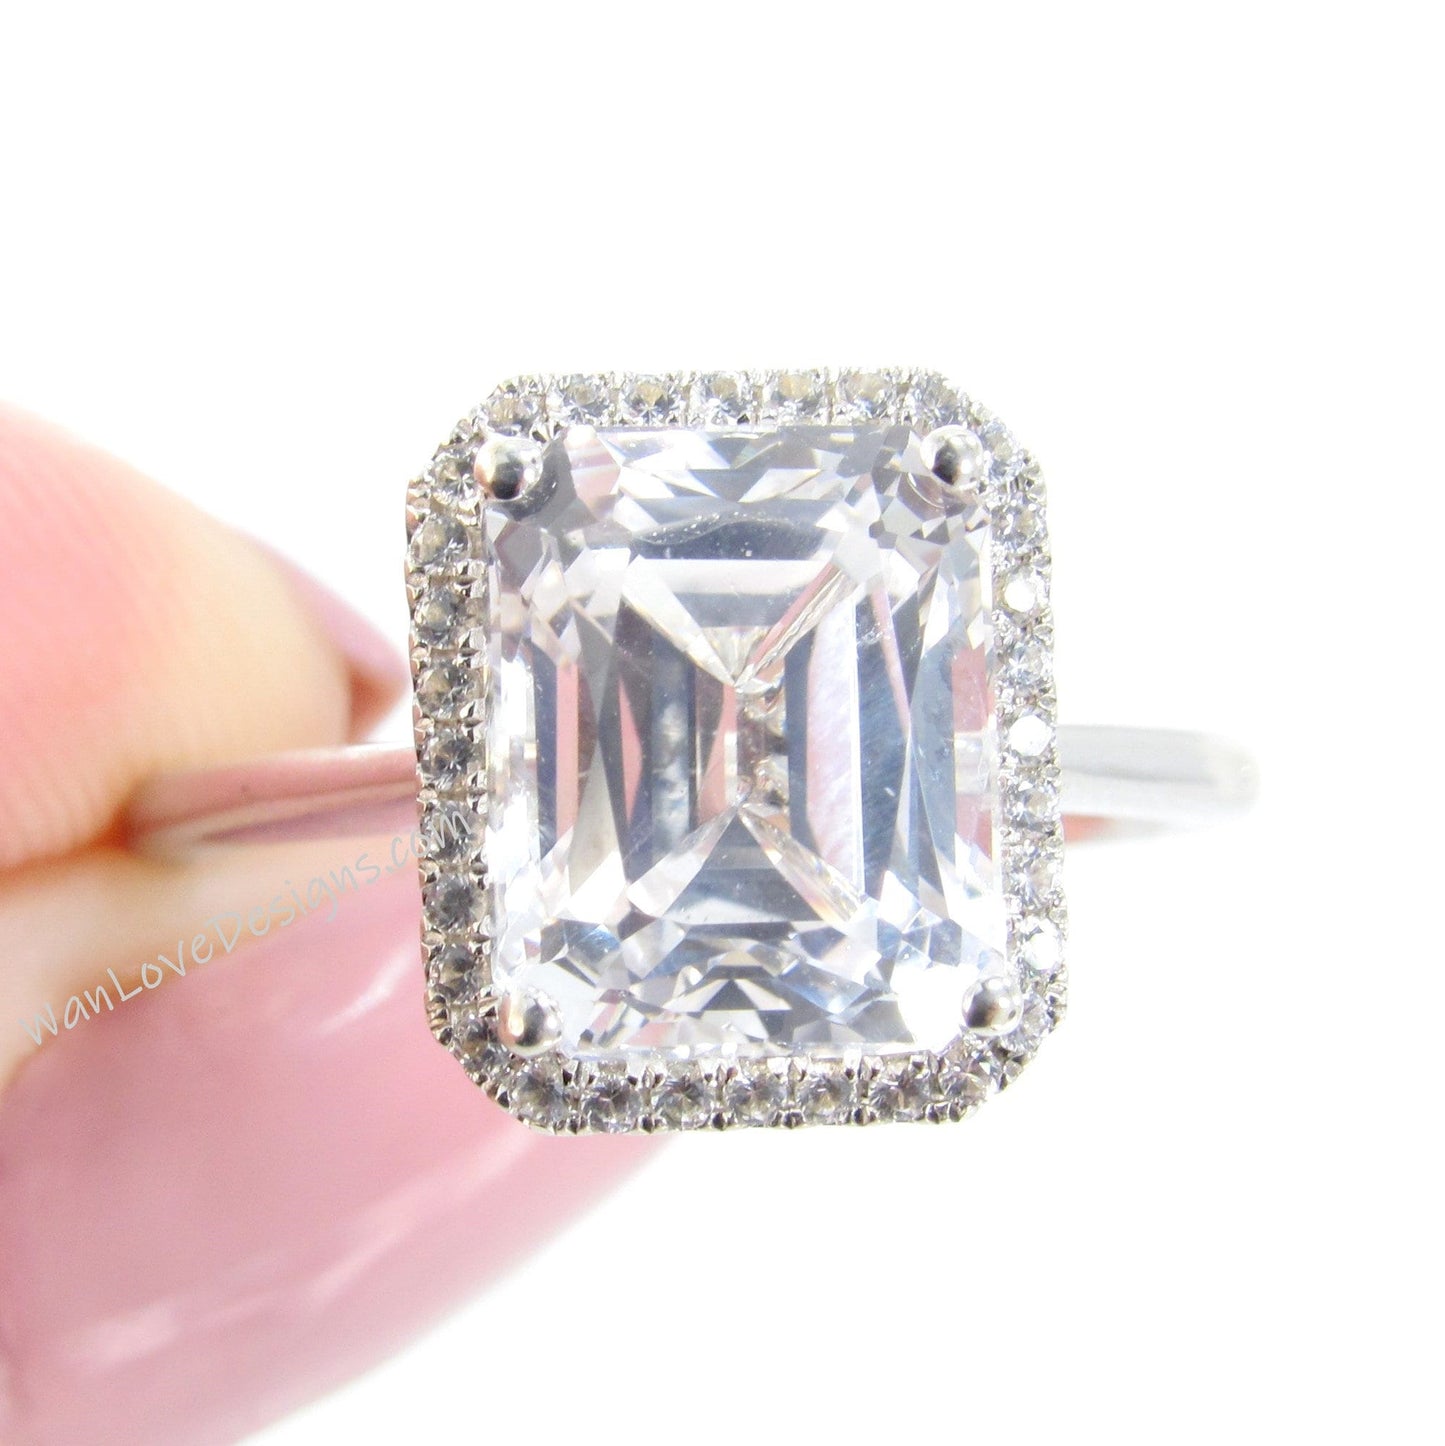 White Sapphire engagement ring emerald cut ring halo ring white sapphire ring vintage art deco prong ring anniversary ring -Ready to ship